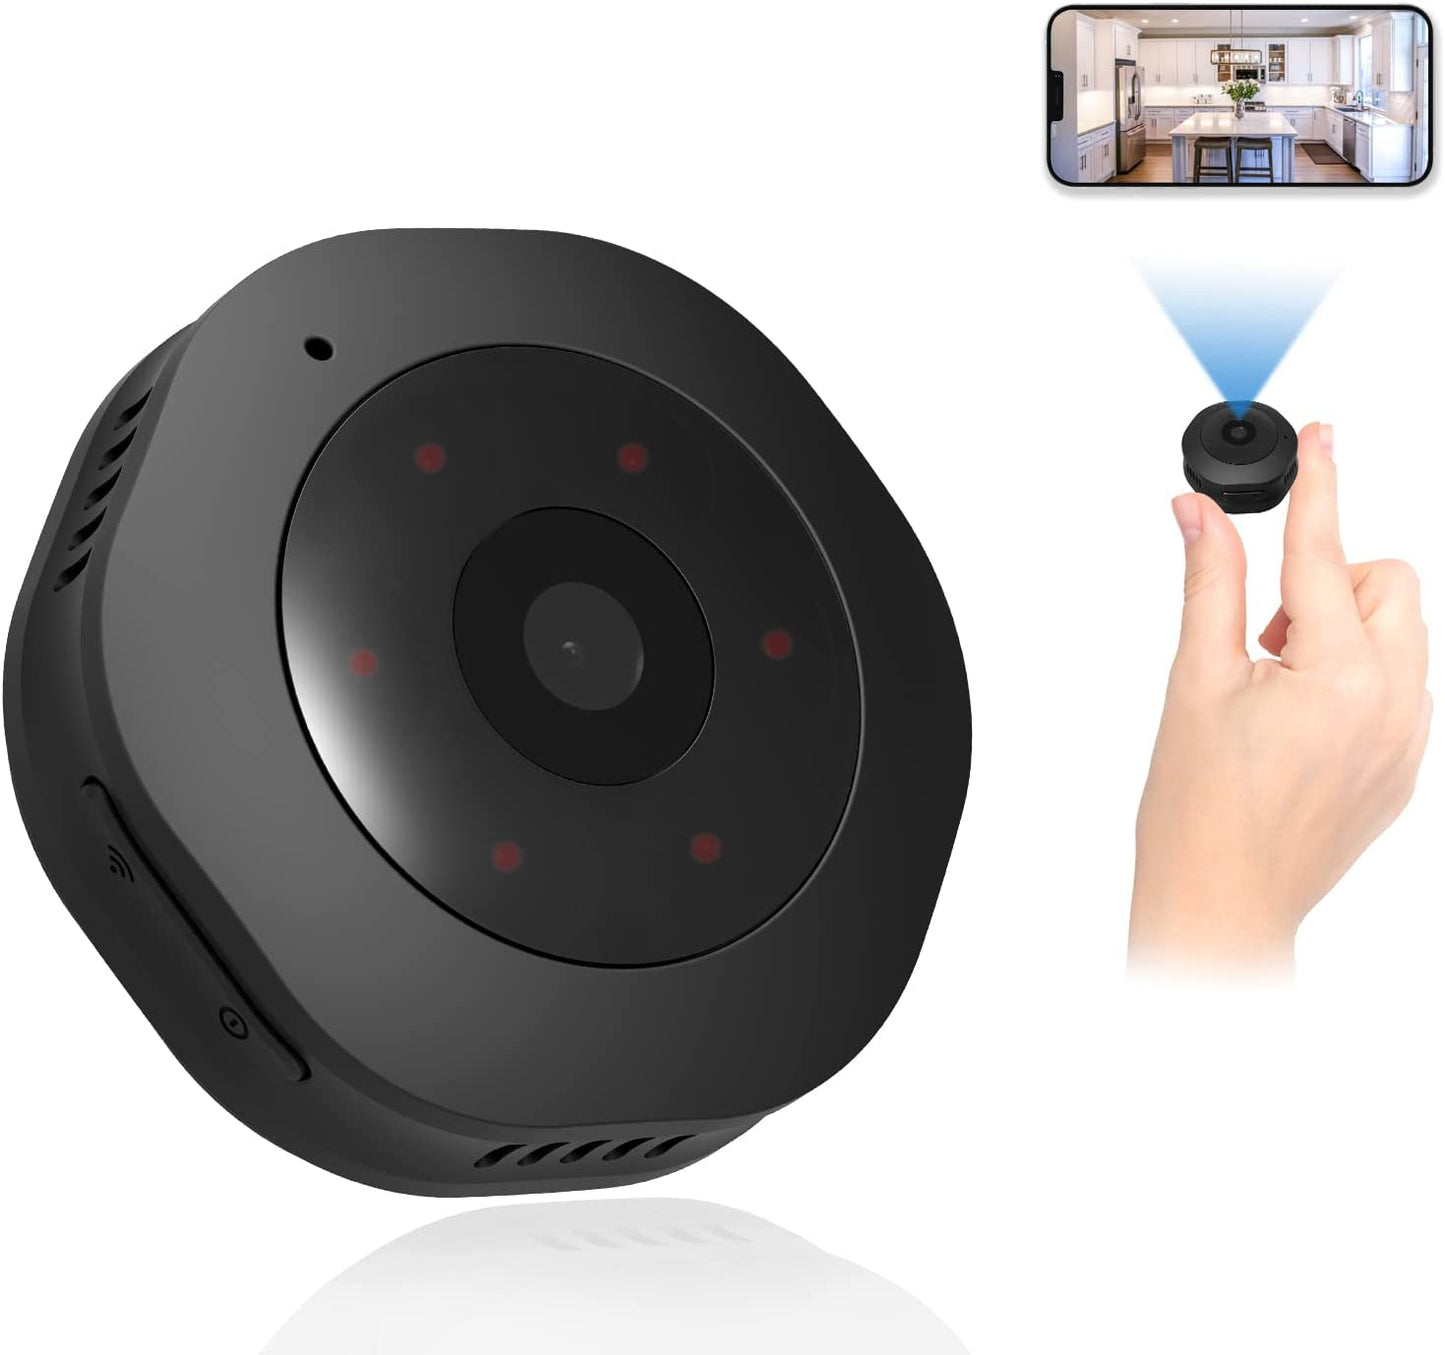 New WiFi Indoor Home Security Camera, Wide Angle Wireless Motion Detection, Small Home Surveillance Security Camera, Nanny Cams with Audio and Video Recording Live Feed